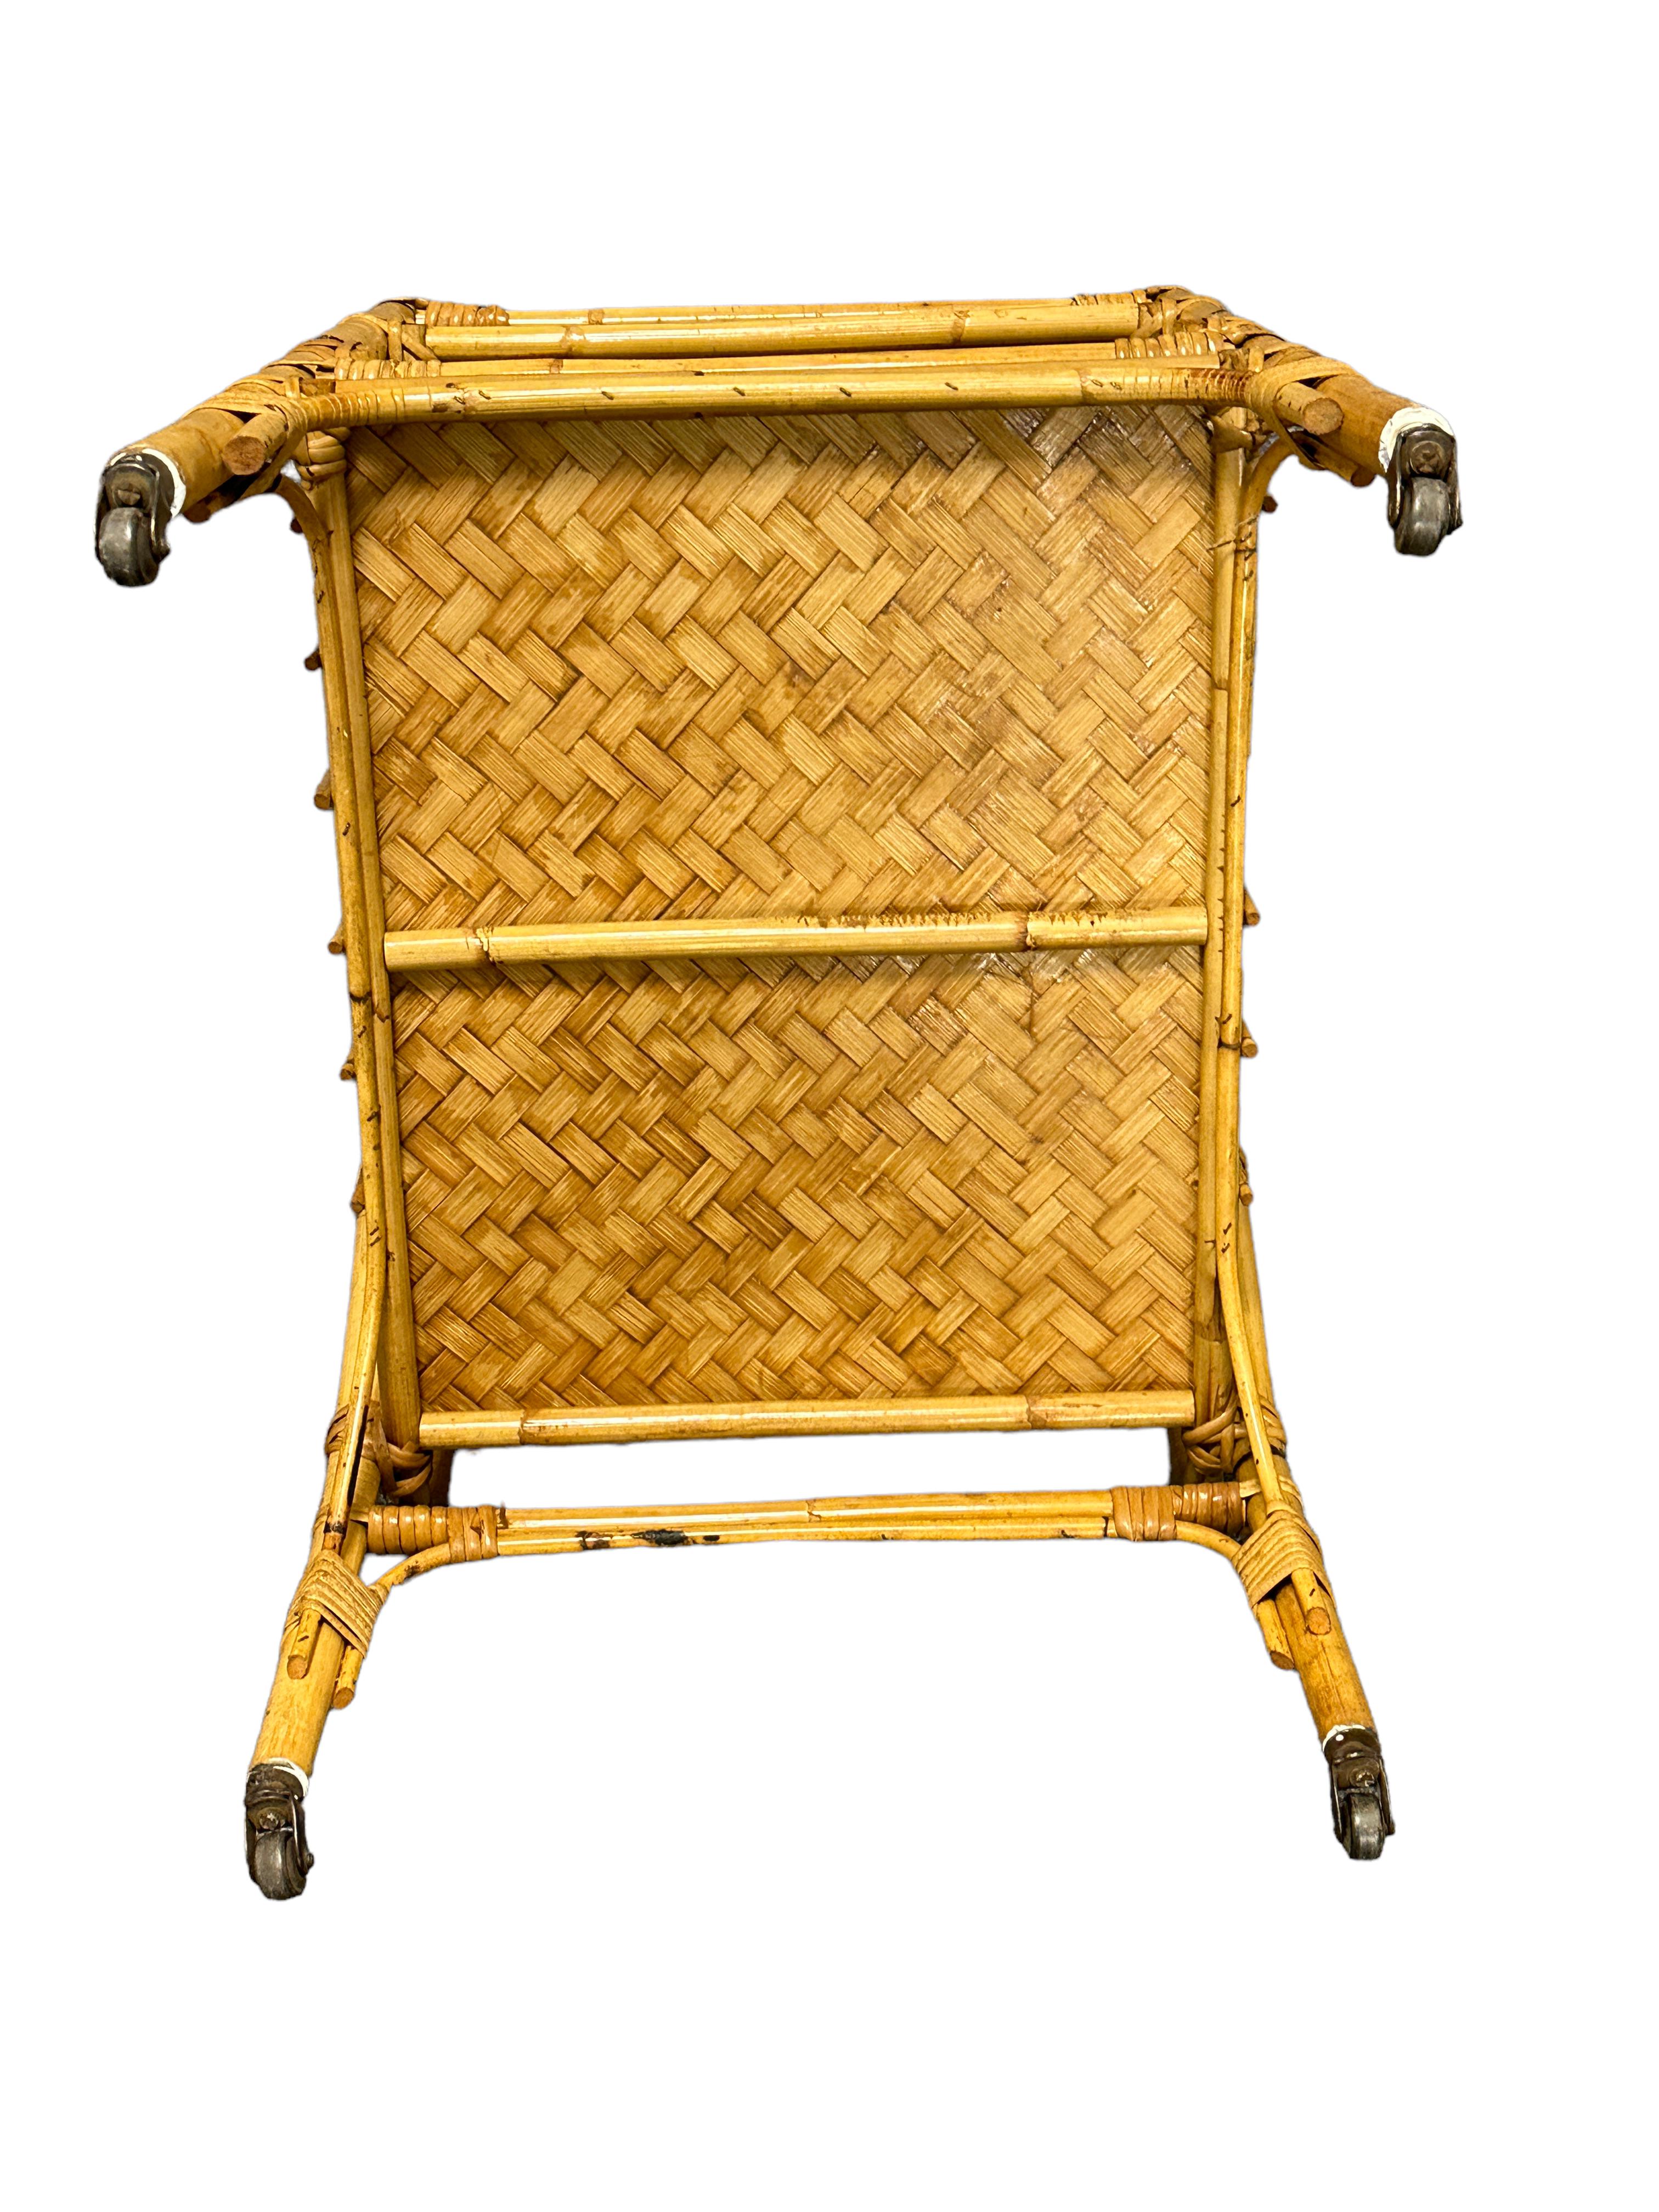 Vivai del Sud Bamboo Wicker Bar Cart Drinks Vine Bottle Stand, Vintage Italy For Sale 2